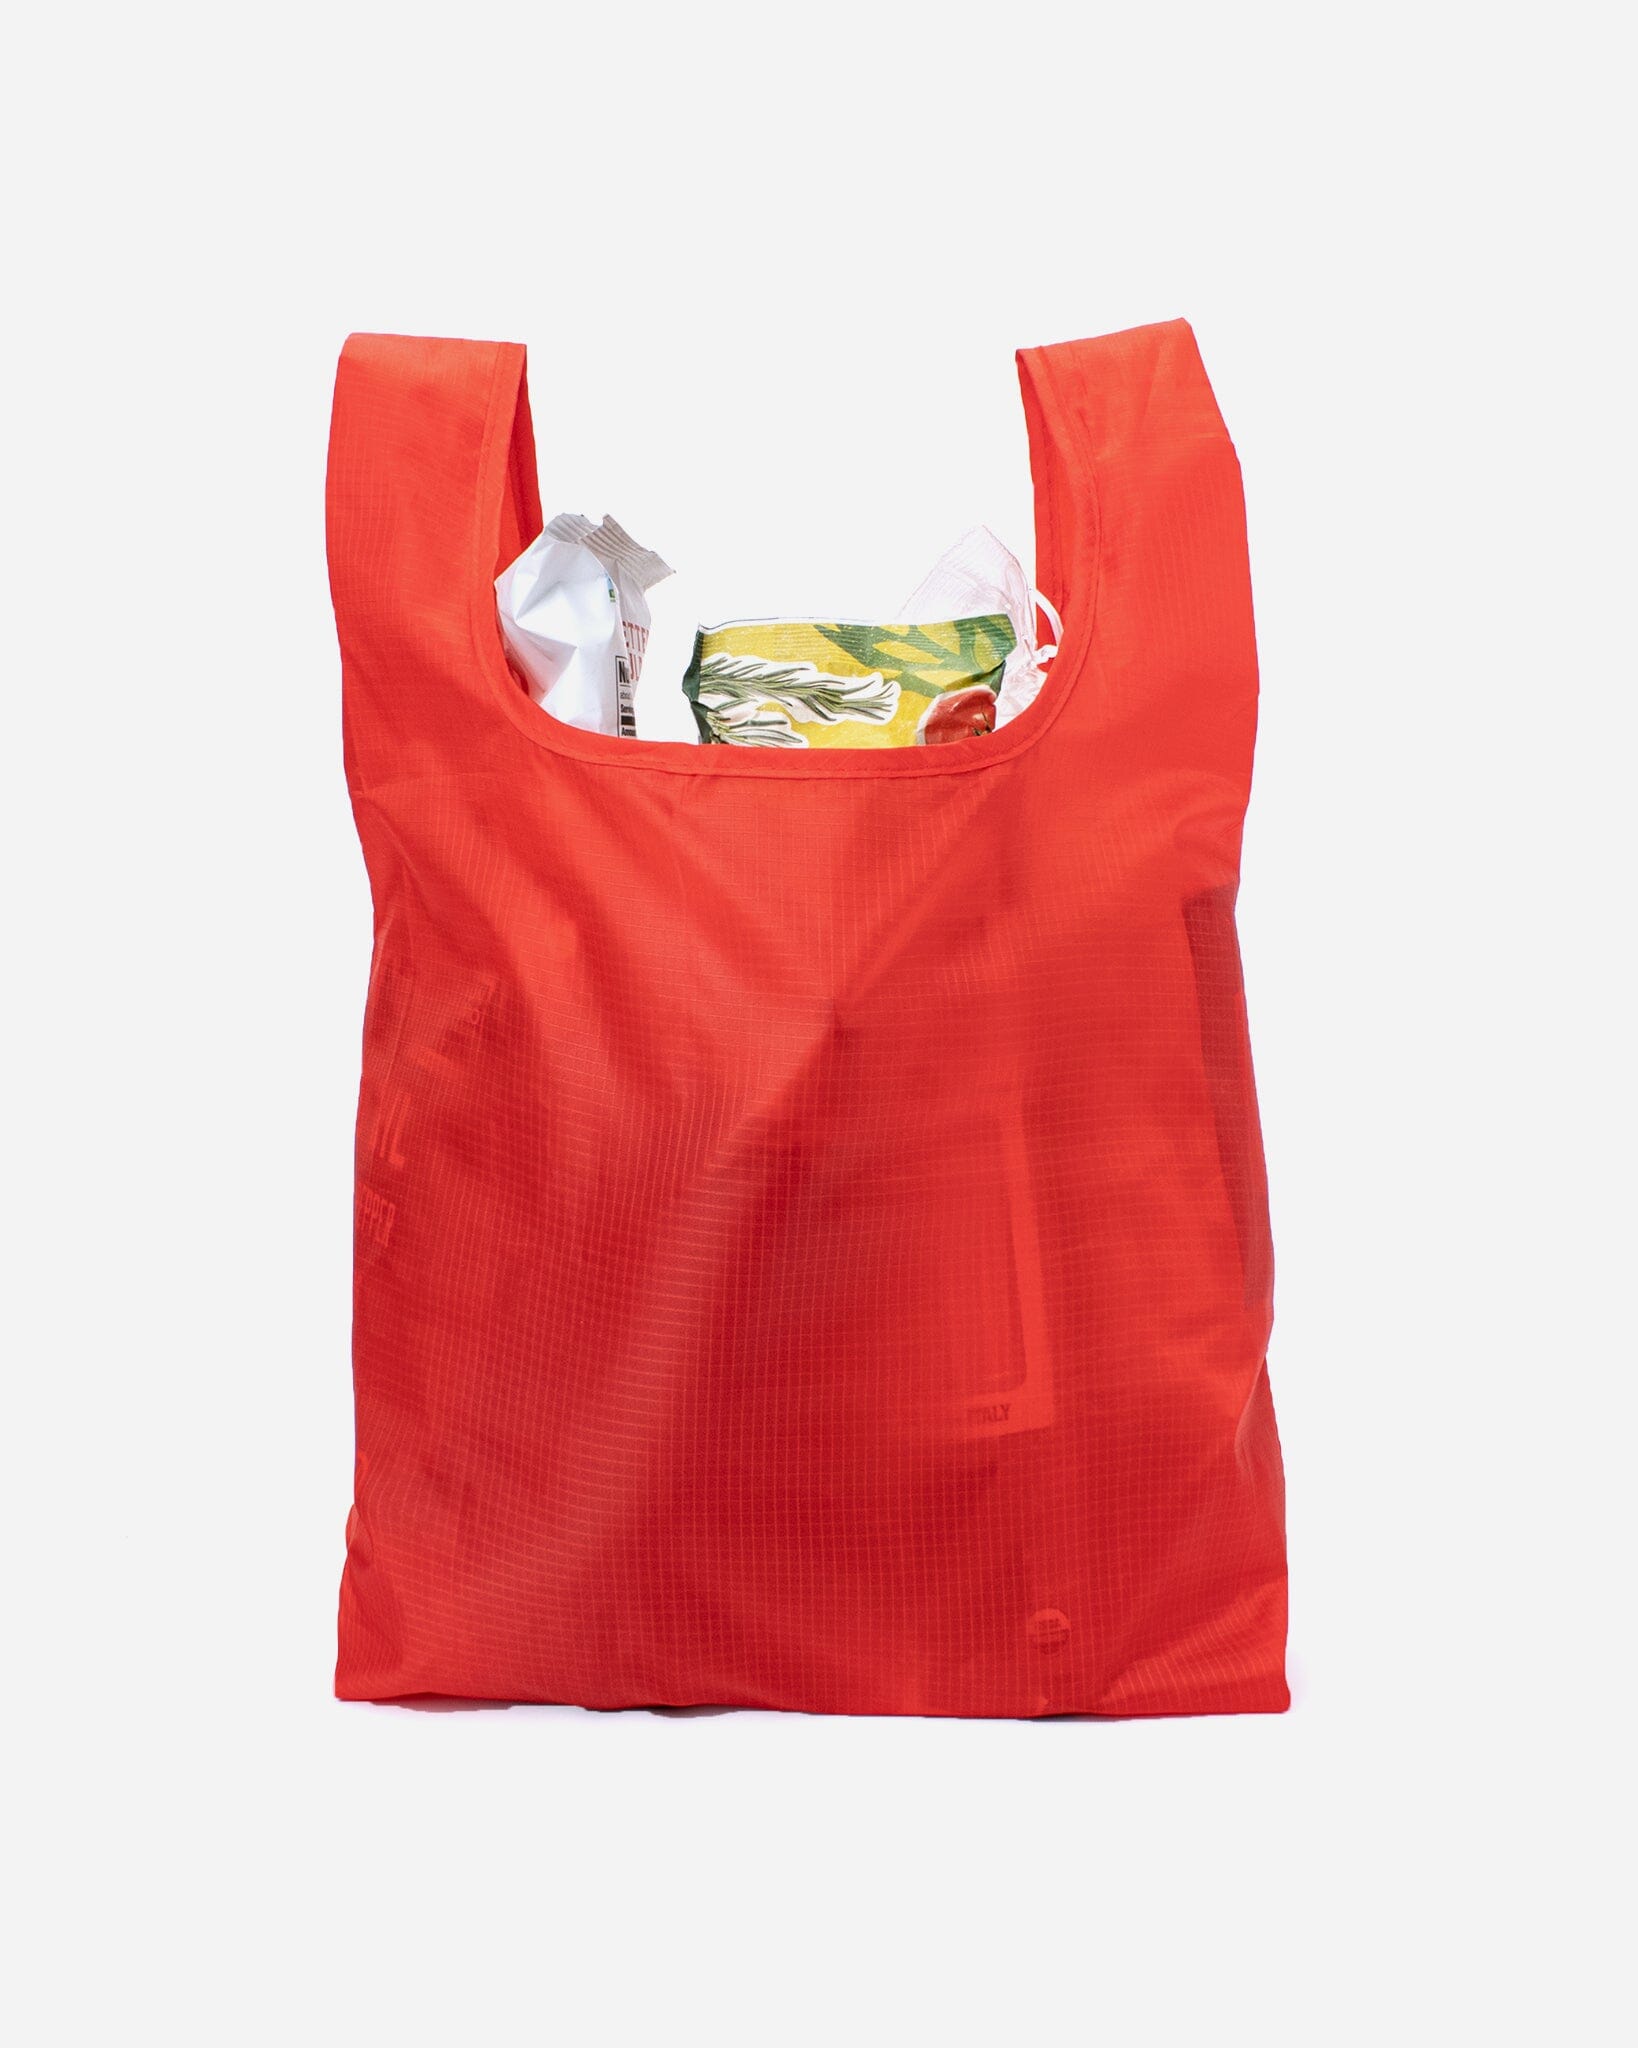 Compact Tote Bag - Red Accessory Kikkerland   